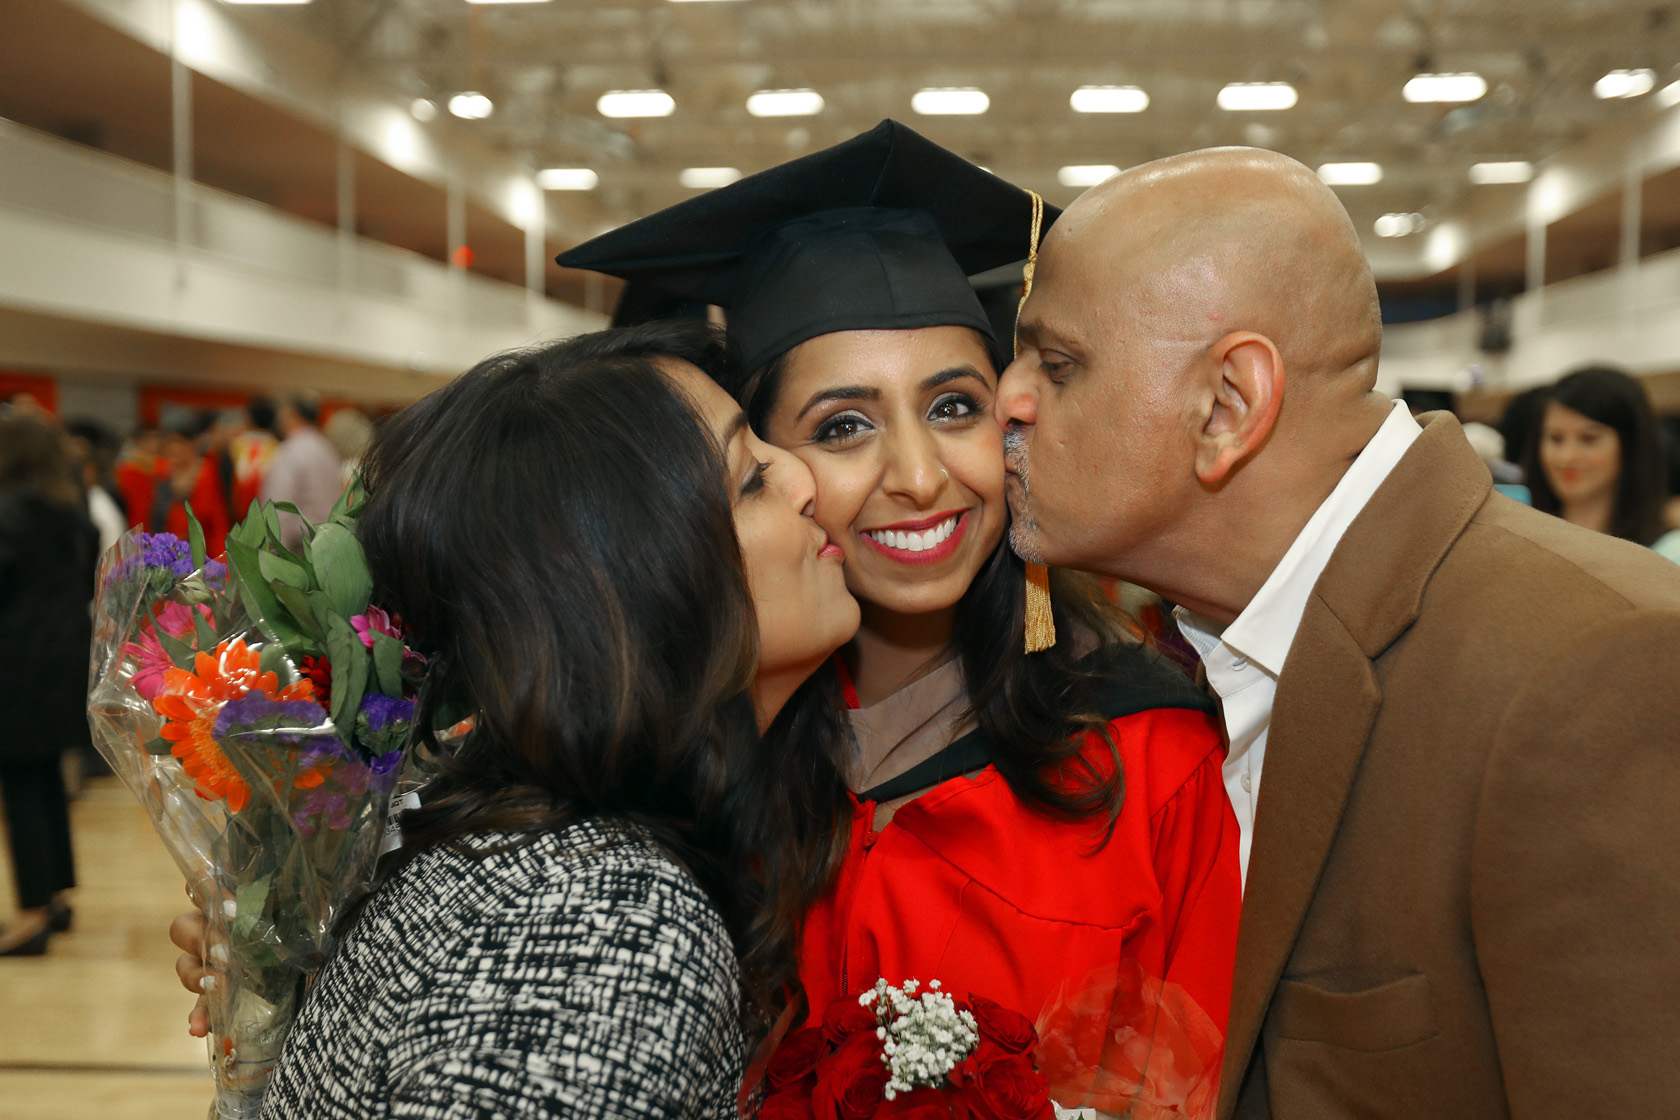 A kiss from her parents for a recent graduate in cap and gown.